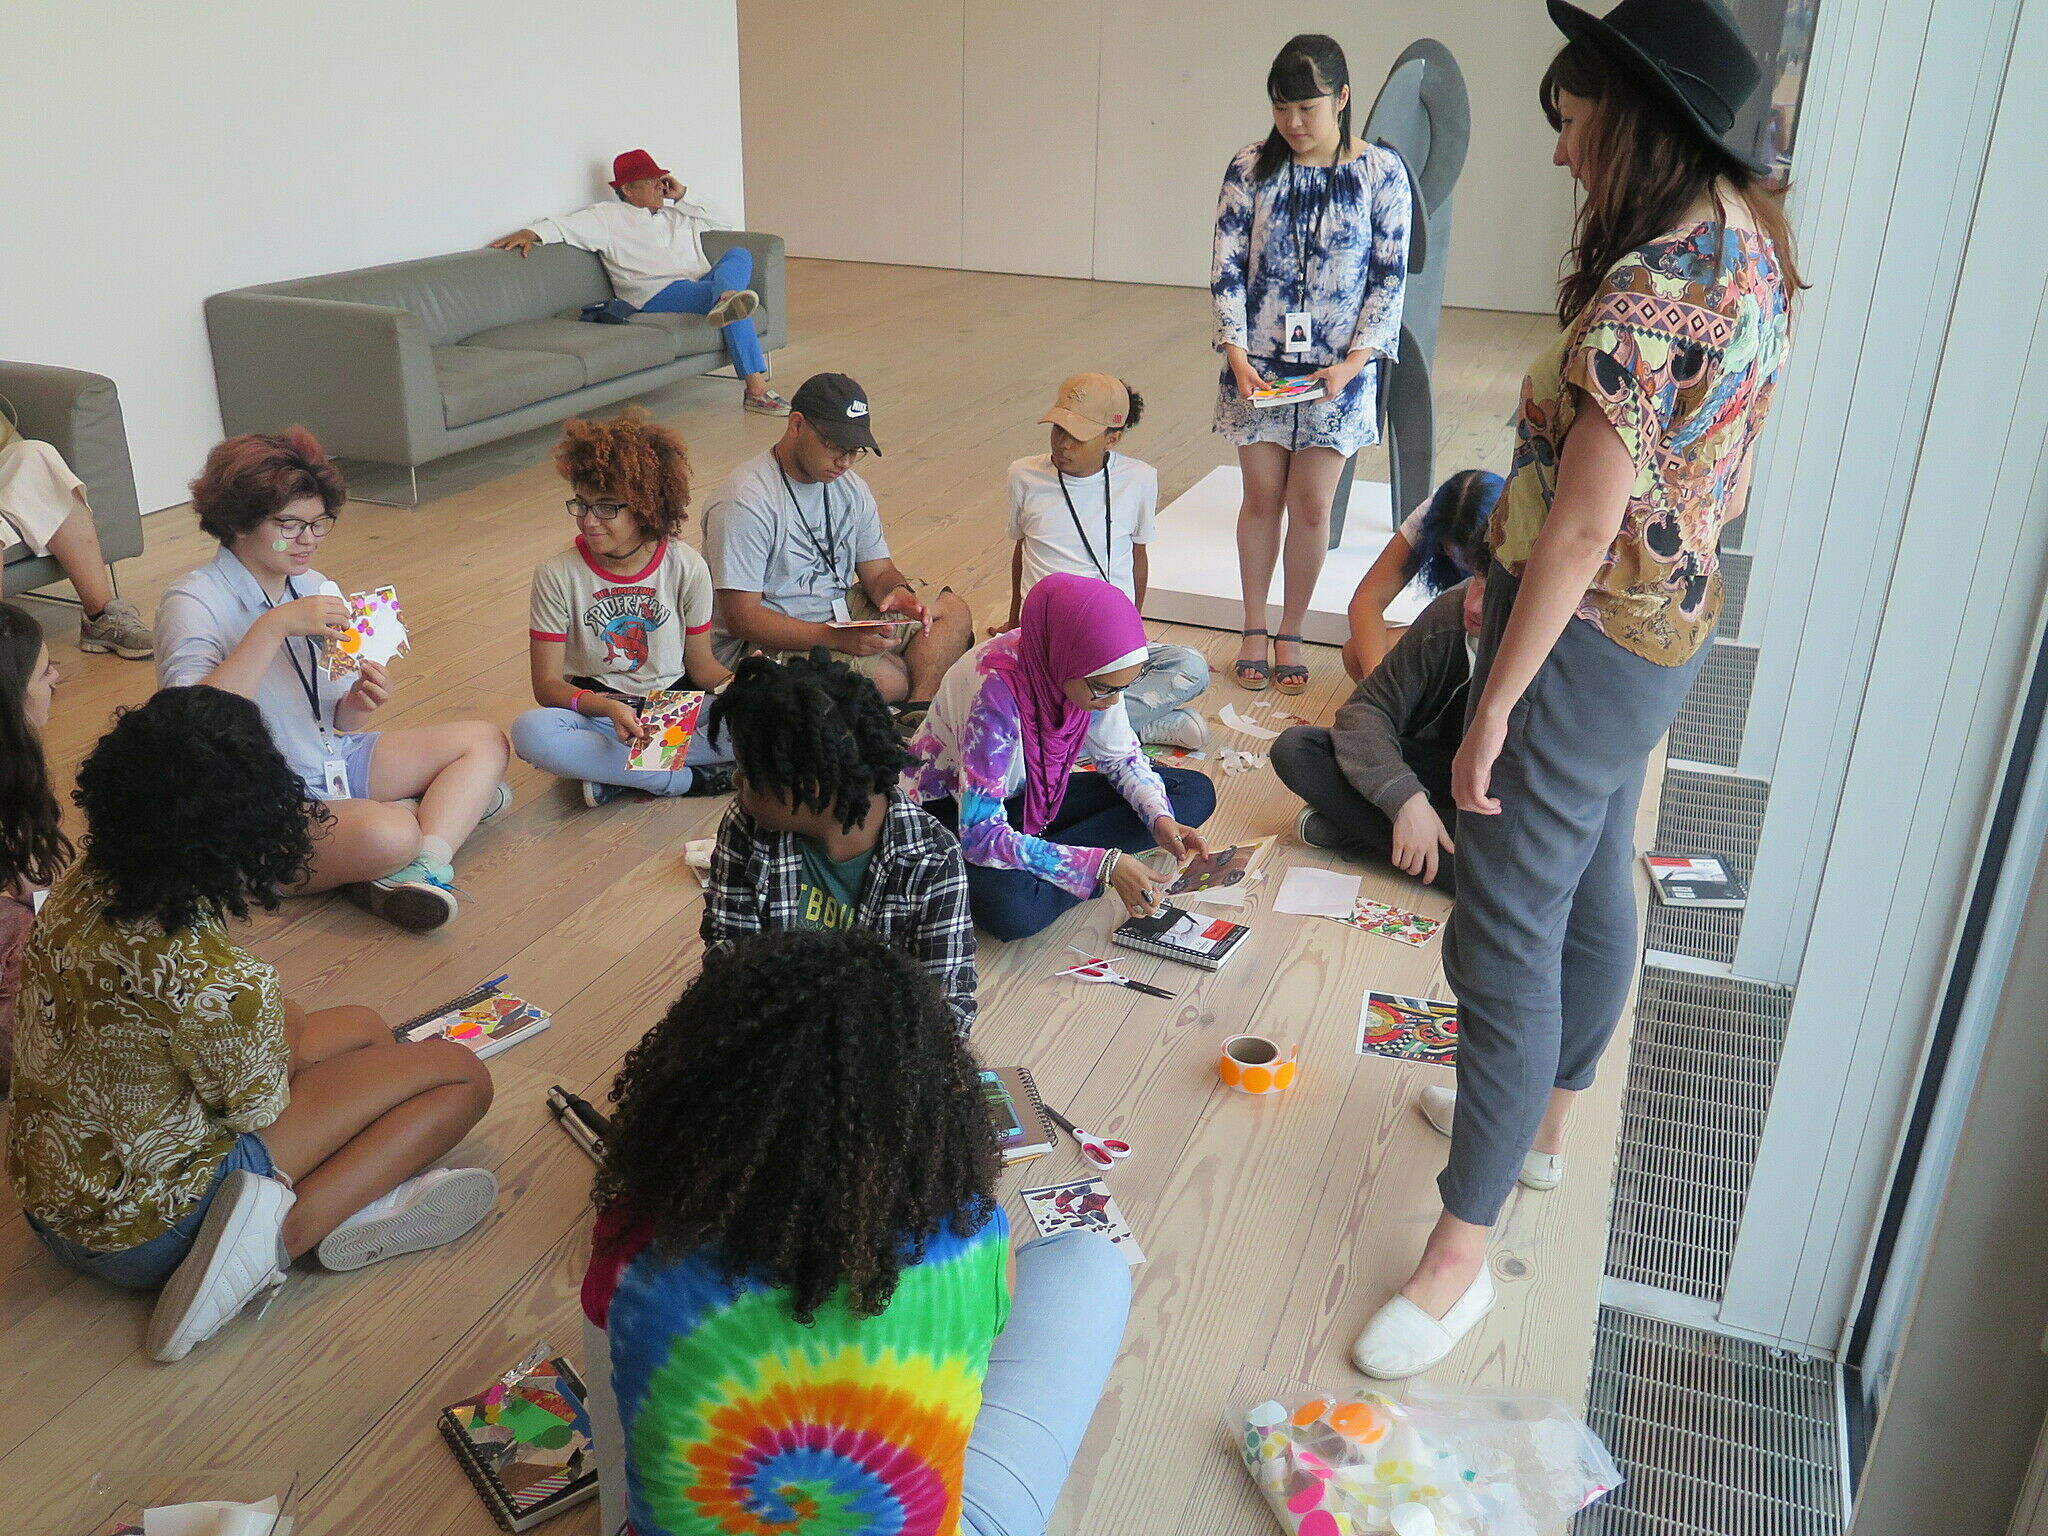 Billie Rae Vision standing and teens with art supplies sitting on the floor